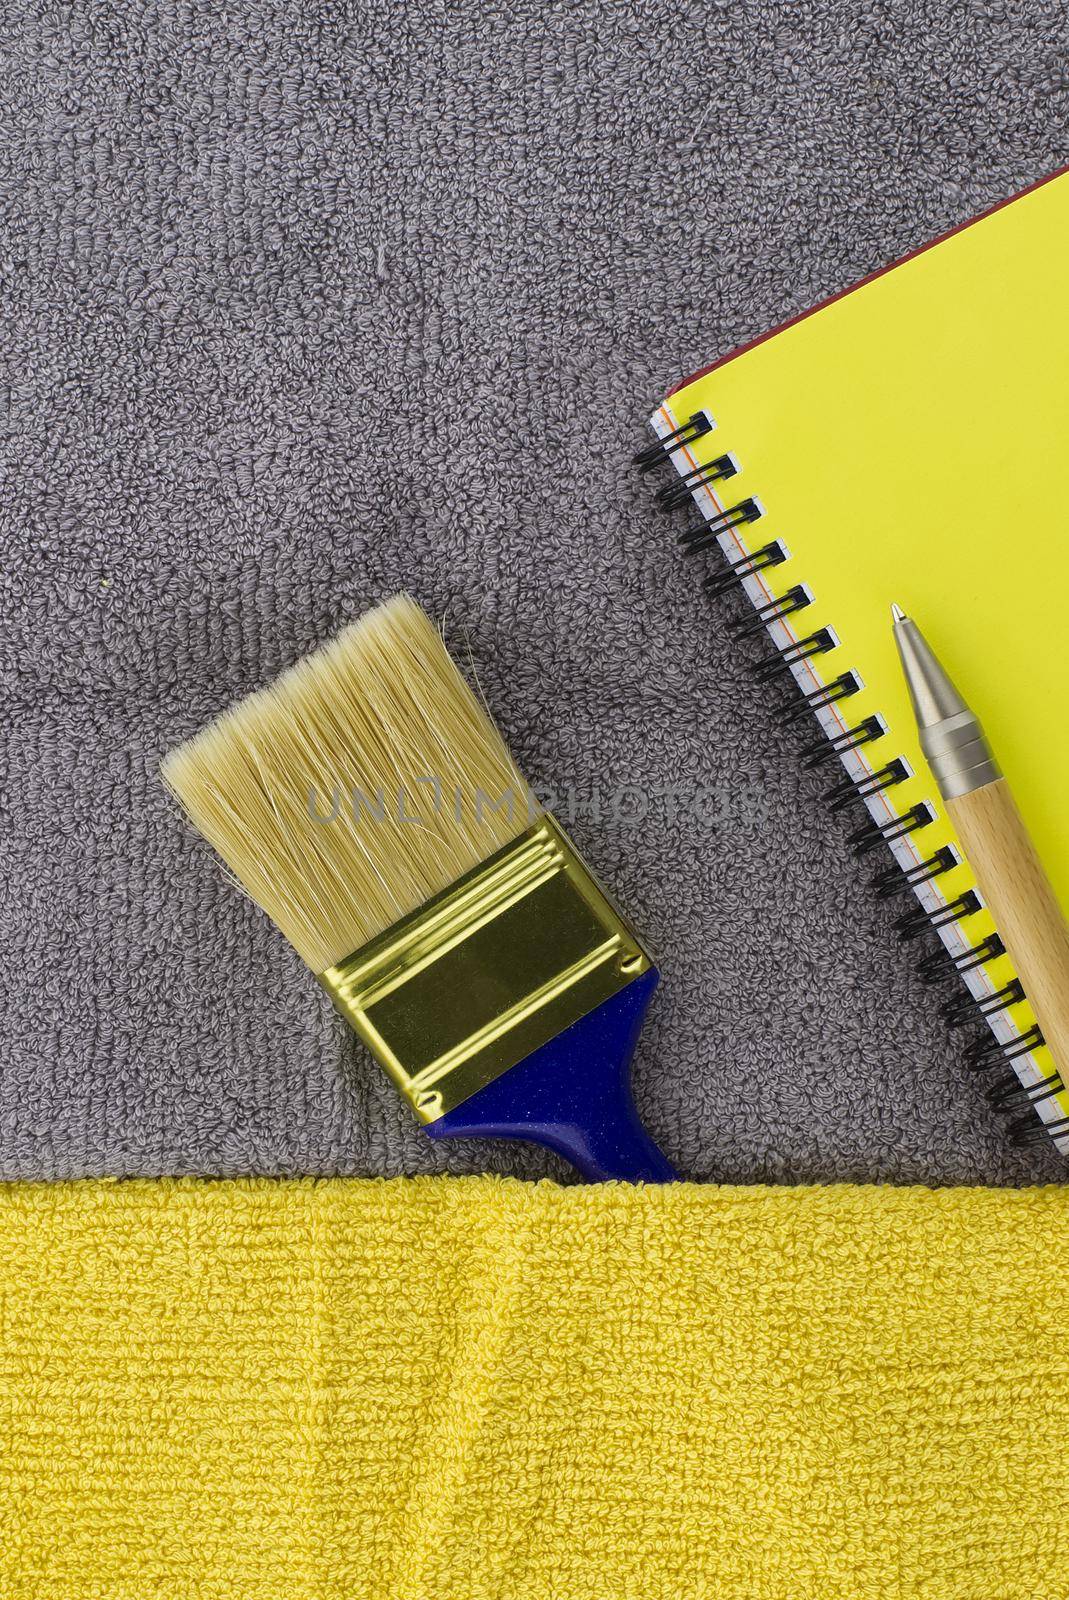 Colorful yellow and grey themed still life with clean paintbrush and yellow wire bound notepad on a two tone grey and yellow textile background